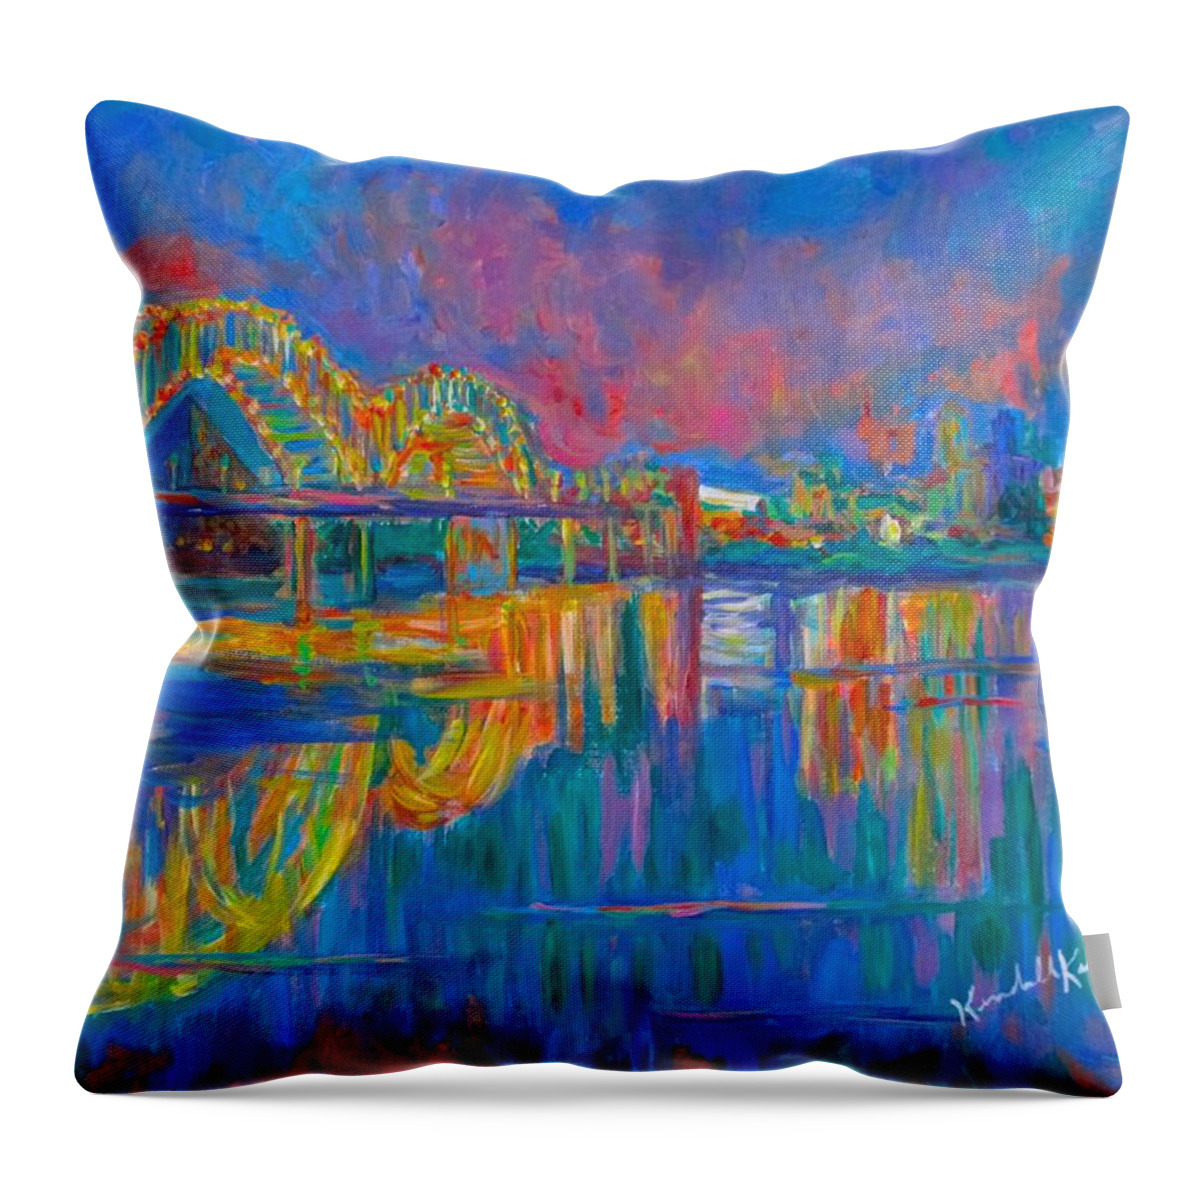 Memphis Throw Pillow featuring the painting Memphis Lights by Kendall Kessler